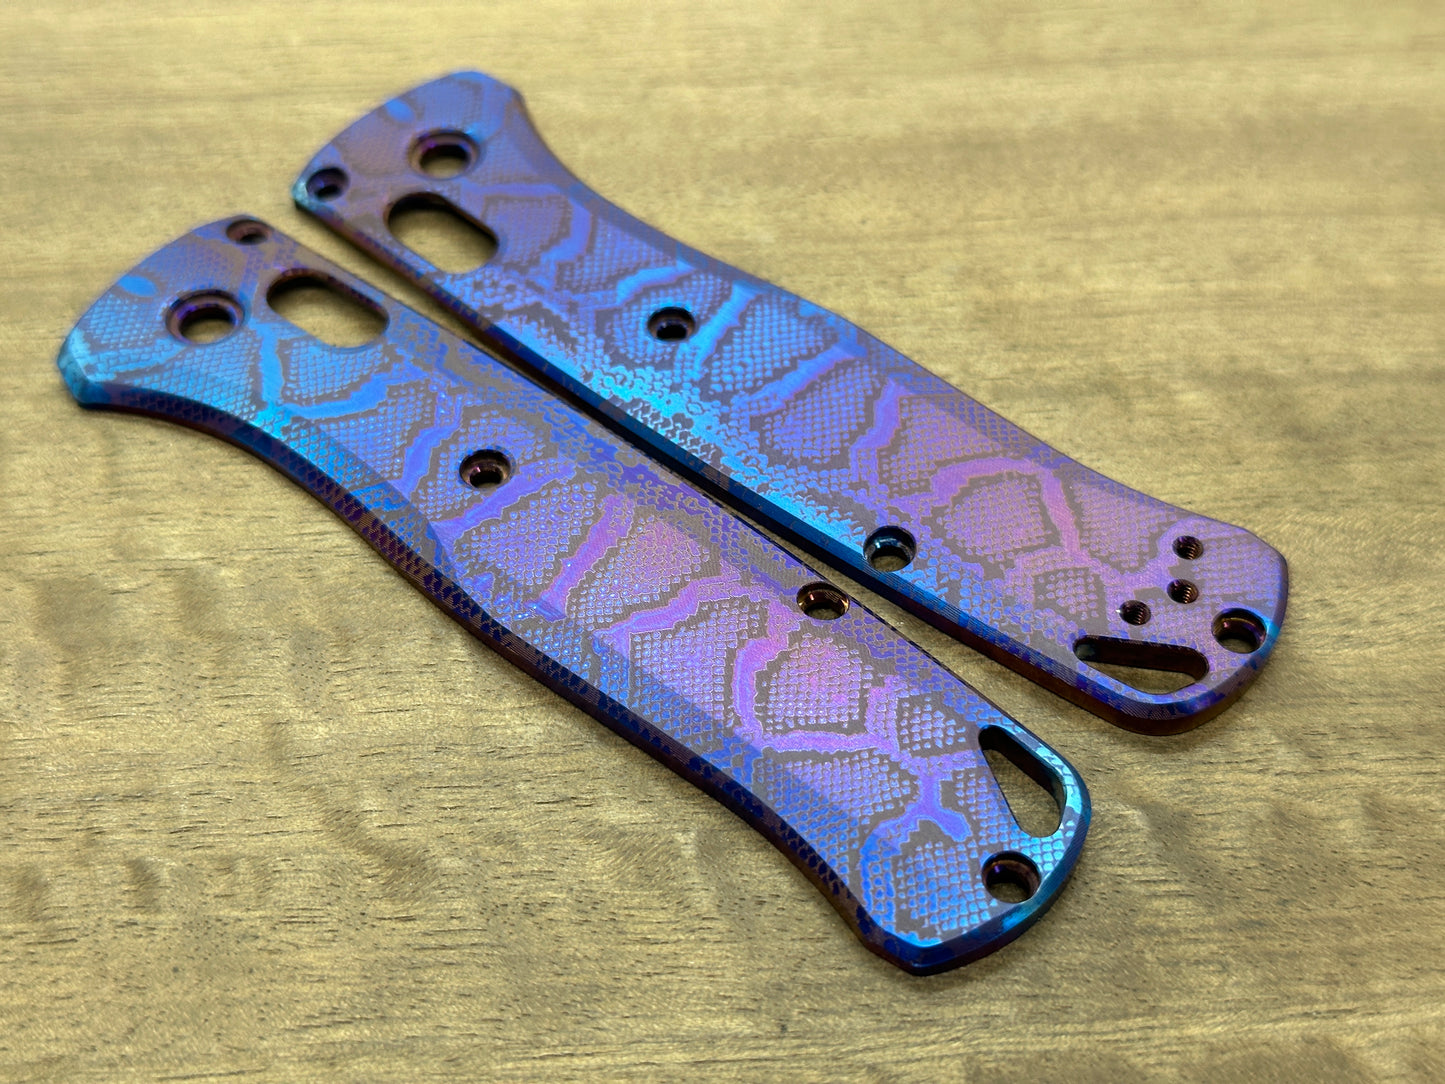 Flamed v3 REPTILIAN engraved Titanium Scales for Benchmade Bugout 535